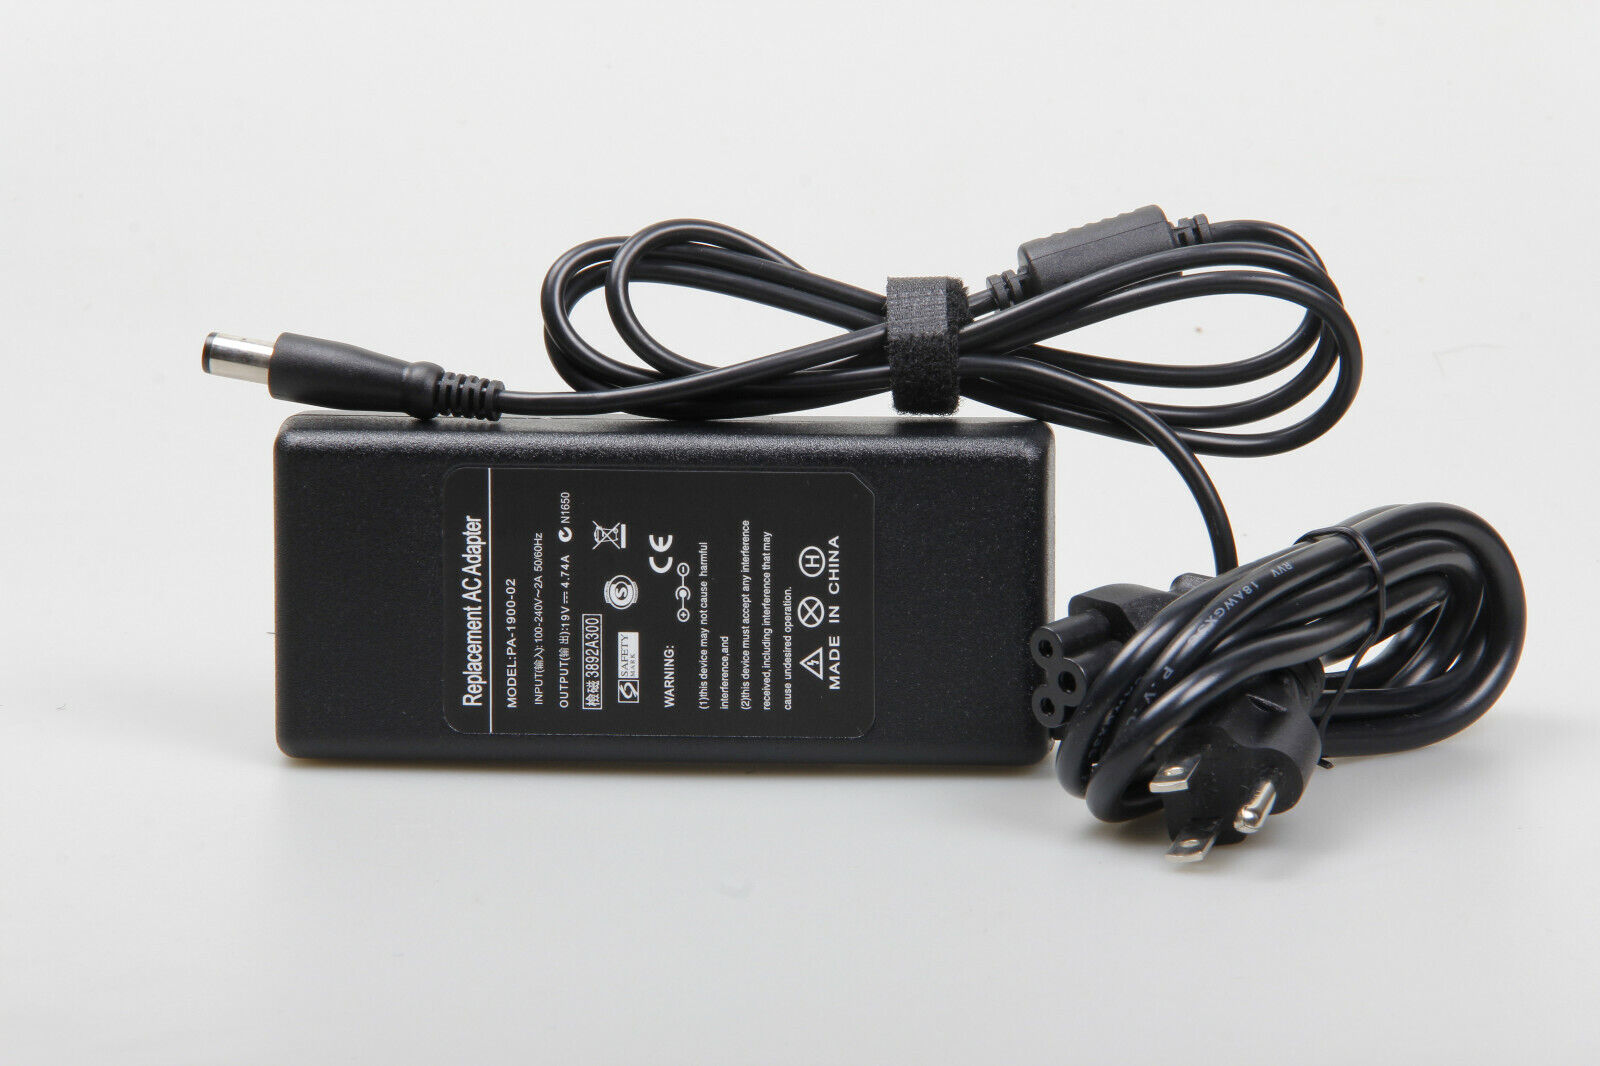 AC Power Adapter For HP Omni 120-1134 120-1135 120-1136 120-1333w AIO Desktop PC